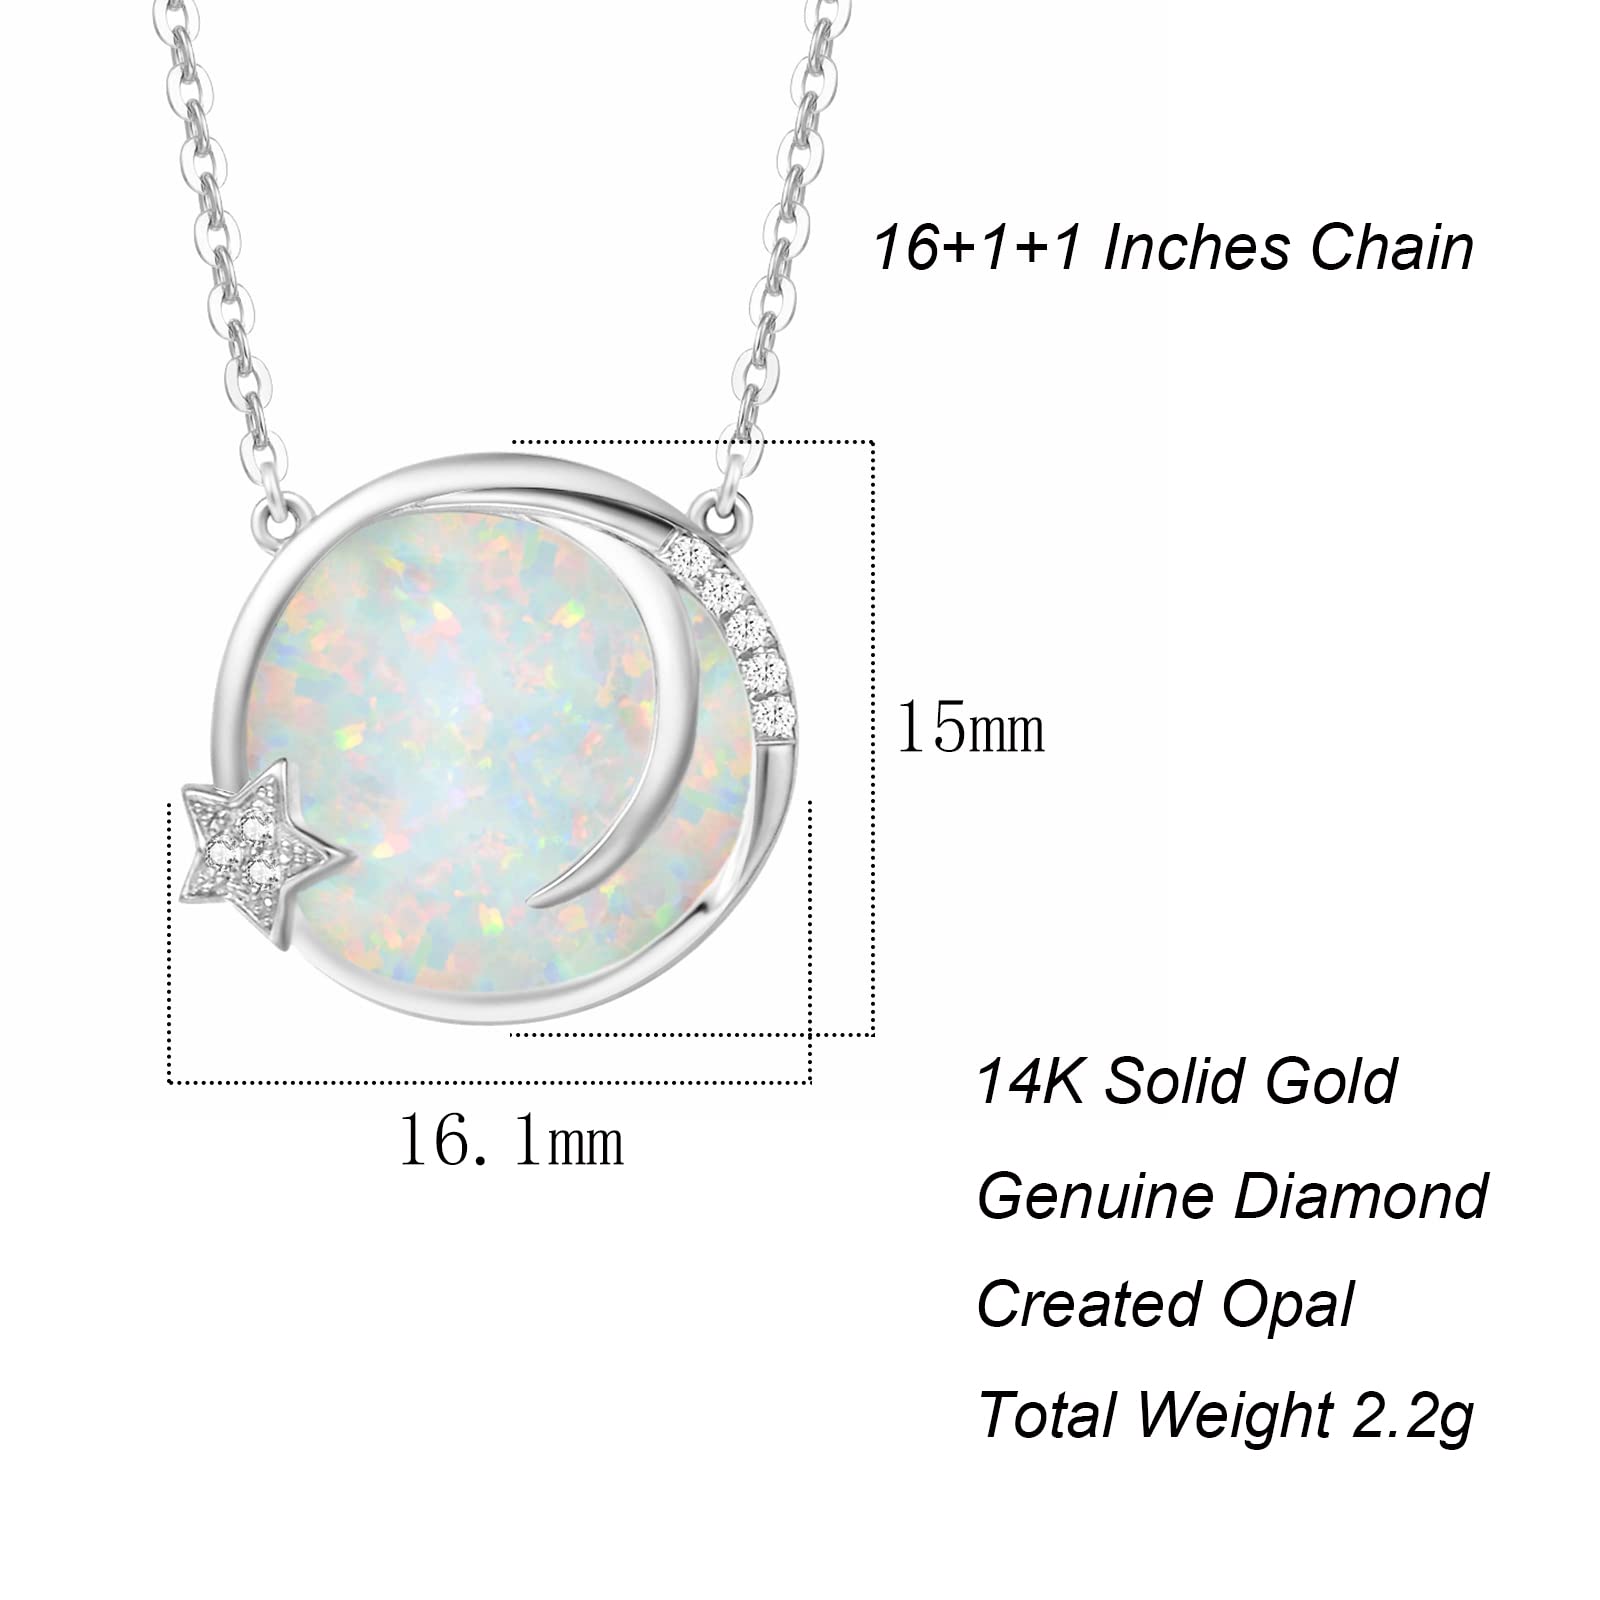 FANCIME 14K Solid Gold Round Mother of Pearl Opal Disc Coin Moon Star Necklace with Natural White Diamonds Fine Delicate Jewelry Anniversary Christmas Holiday Gifts for Women Girls